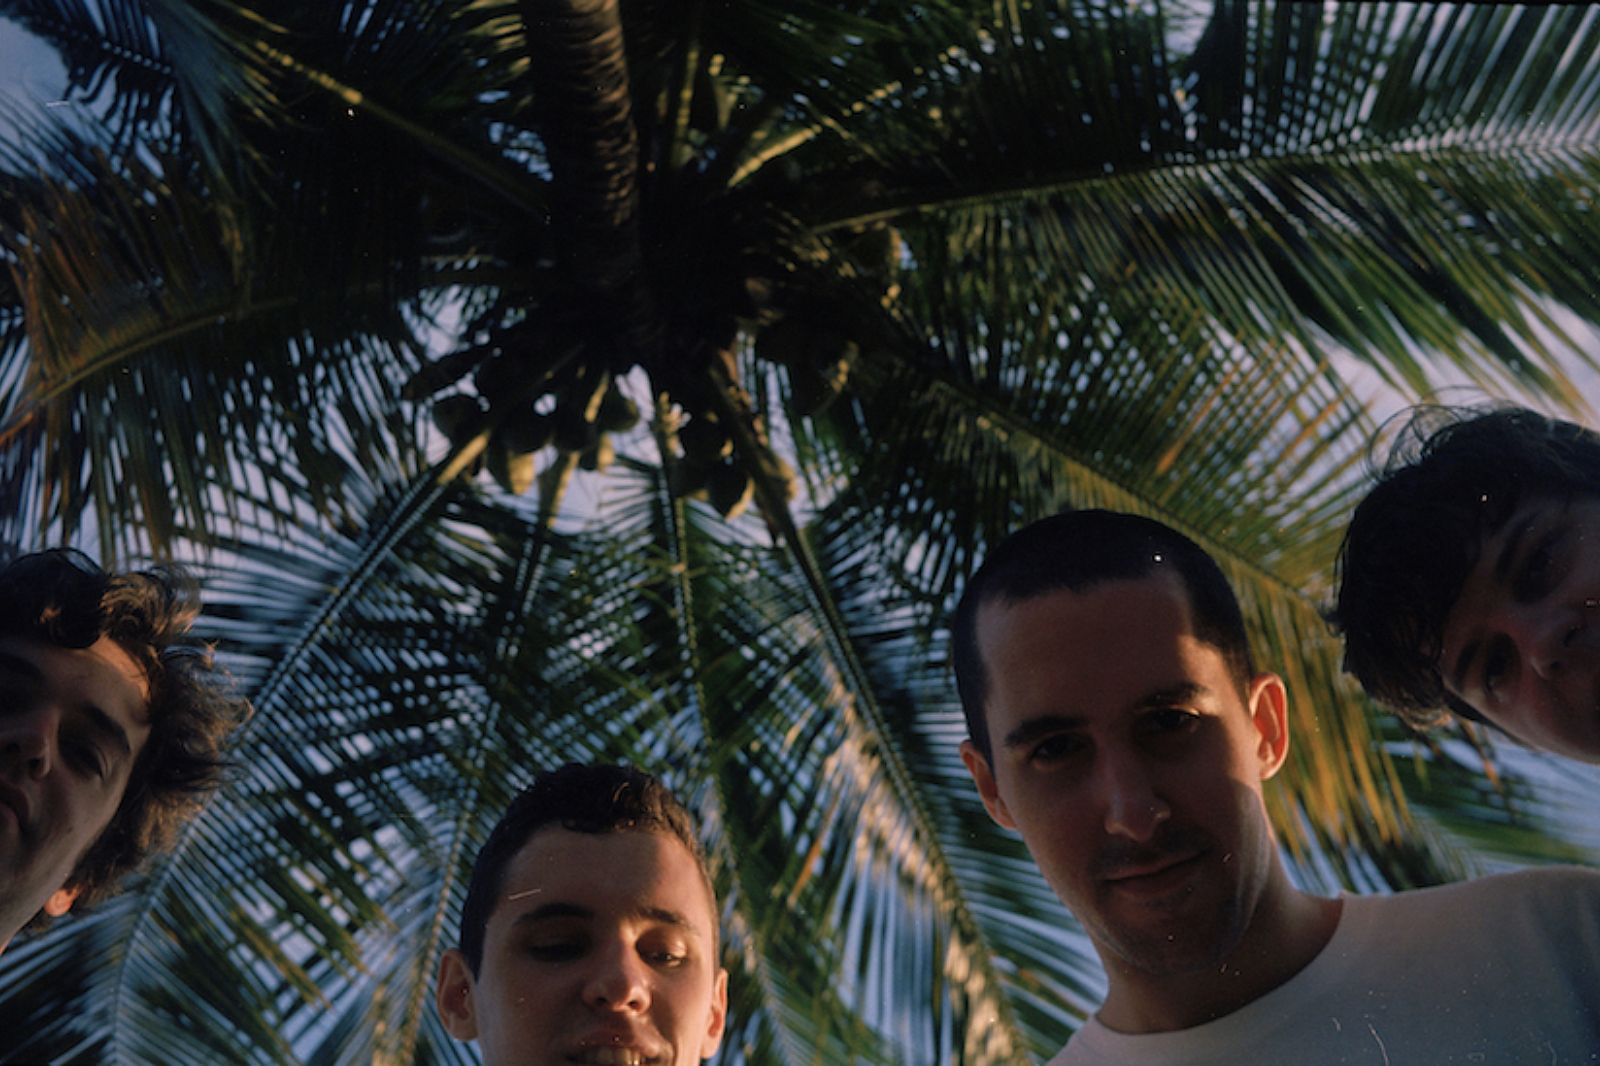 BADBADNOTGOOD are headed on a UK tour in November